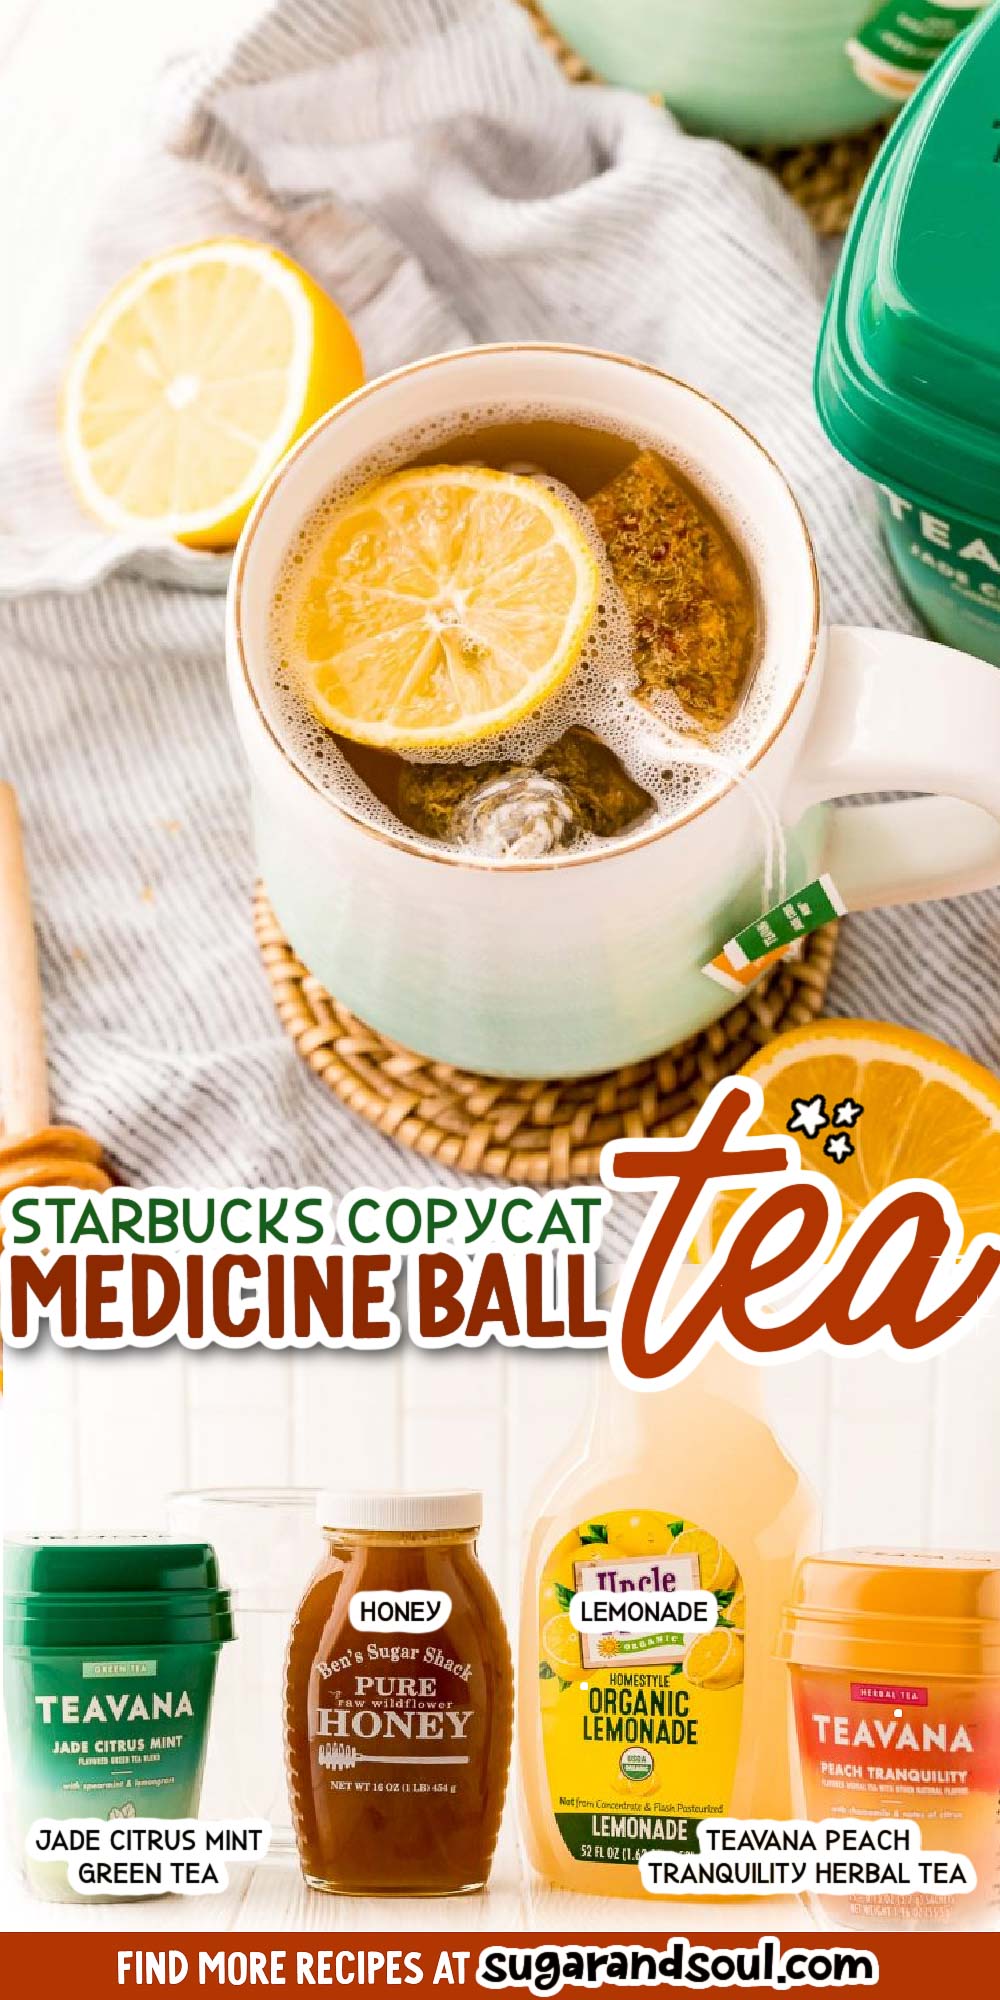 This Starbucks Medicine Ball Tea is a deliciously soothing copycat recipe made with peach and mint teas, honey, and lemonade! via @sugarandsoulco